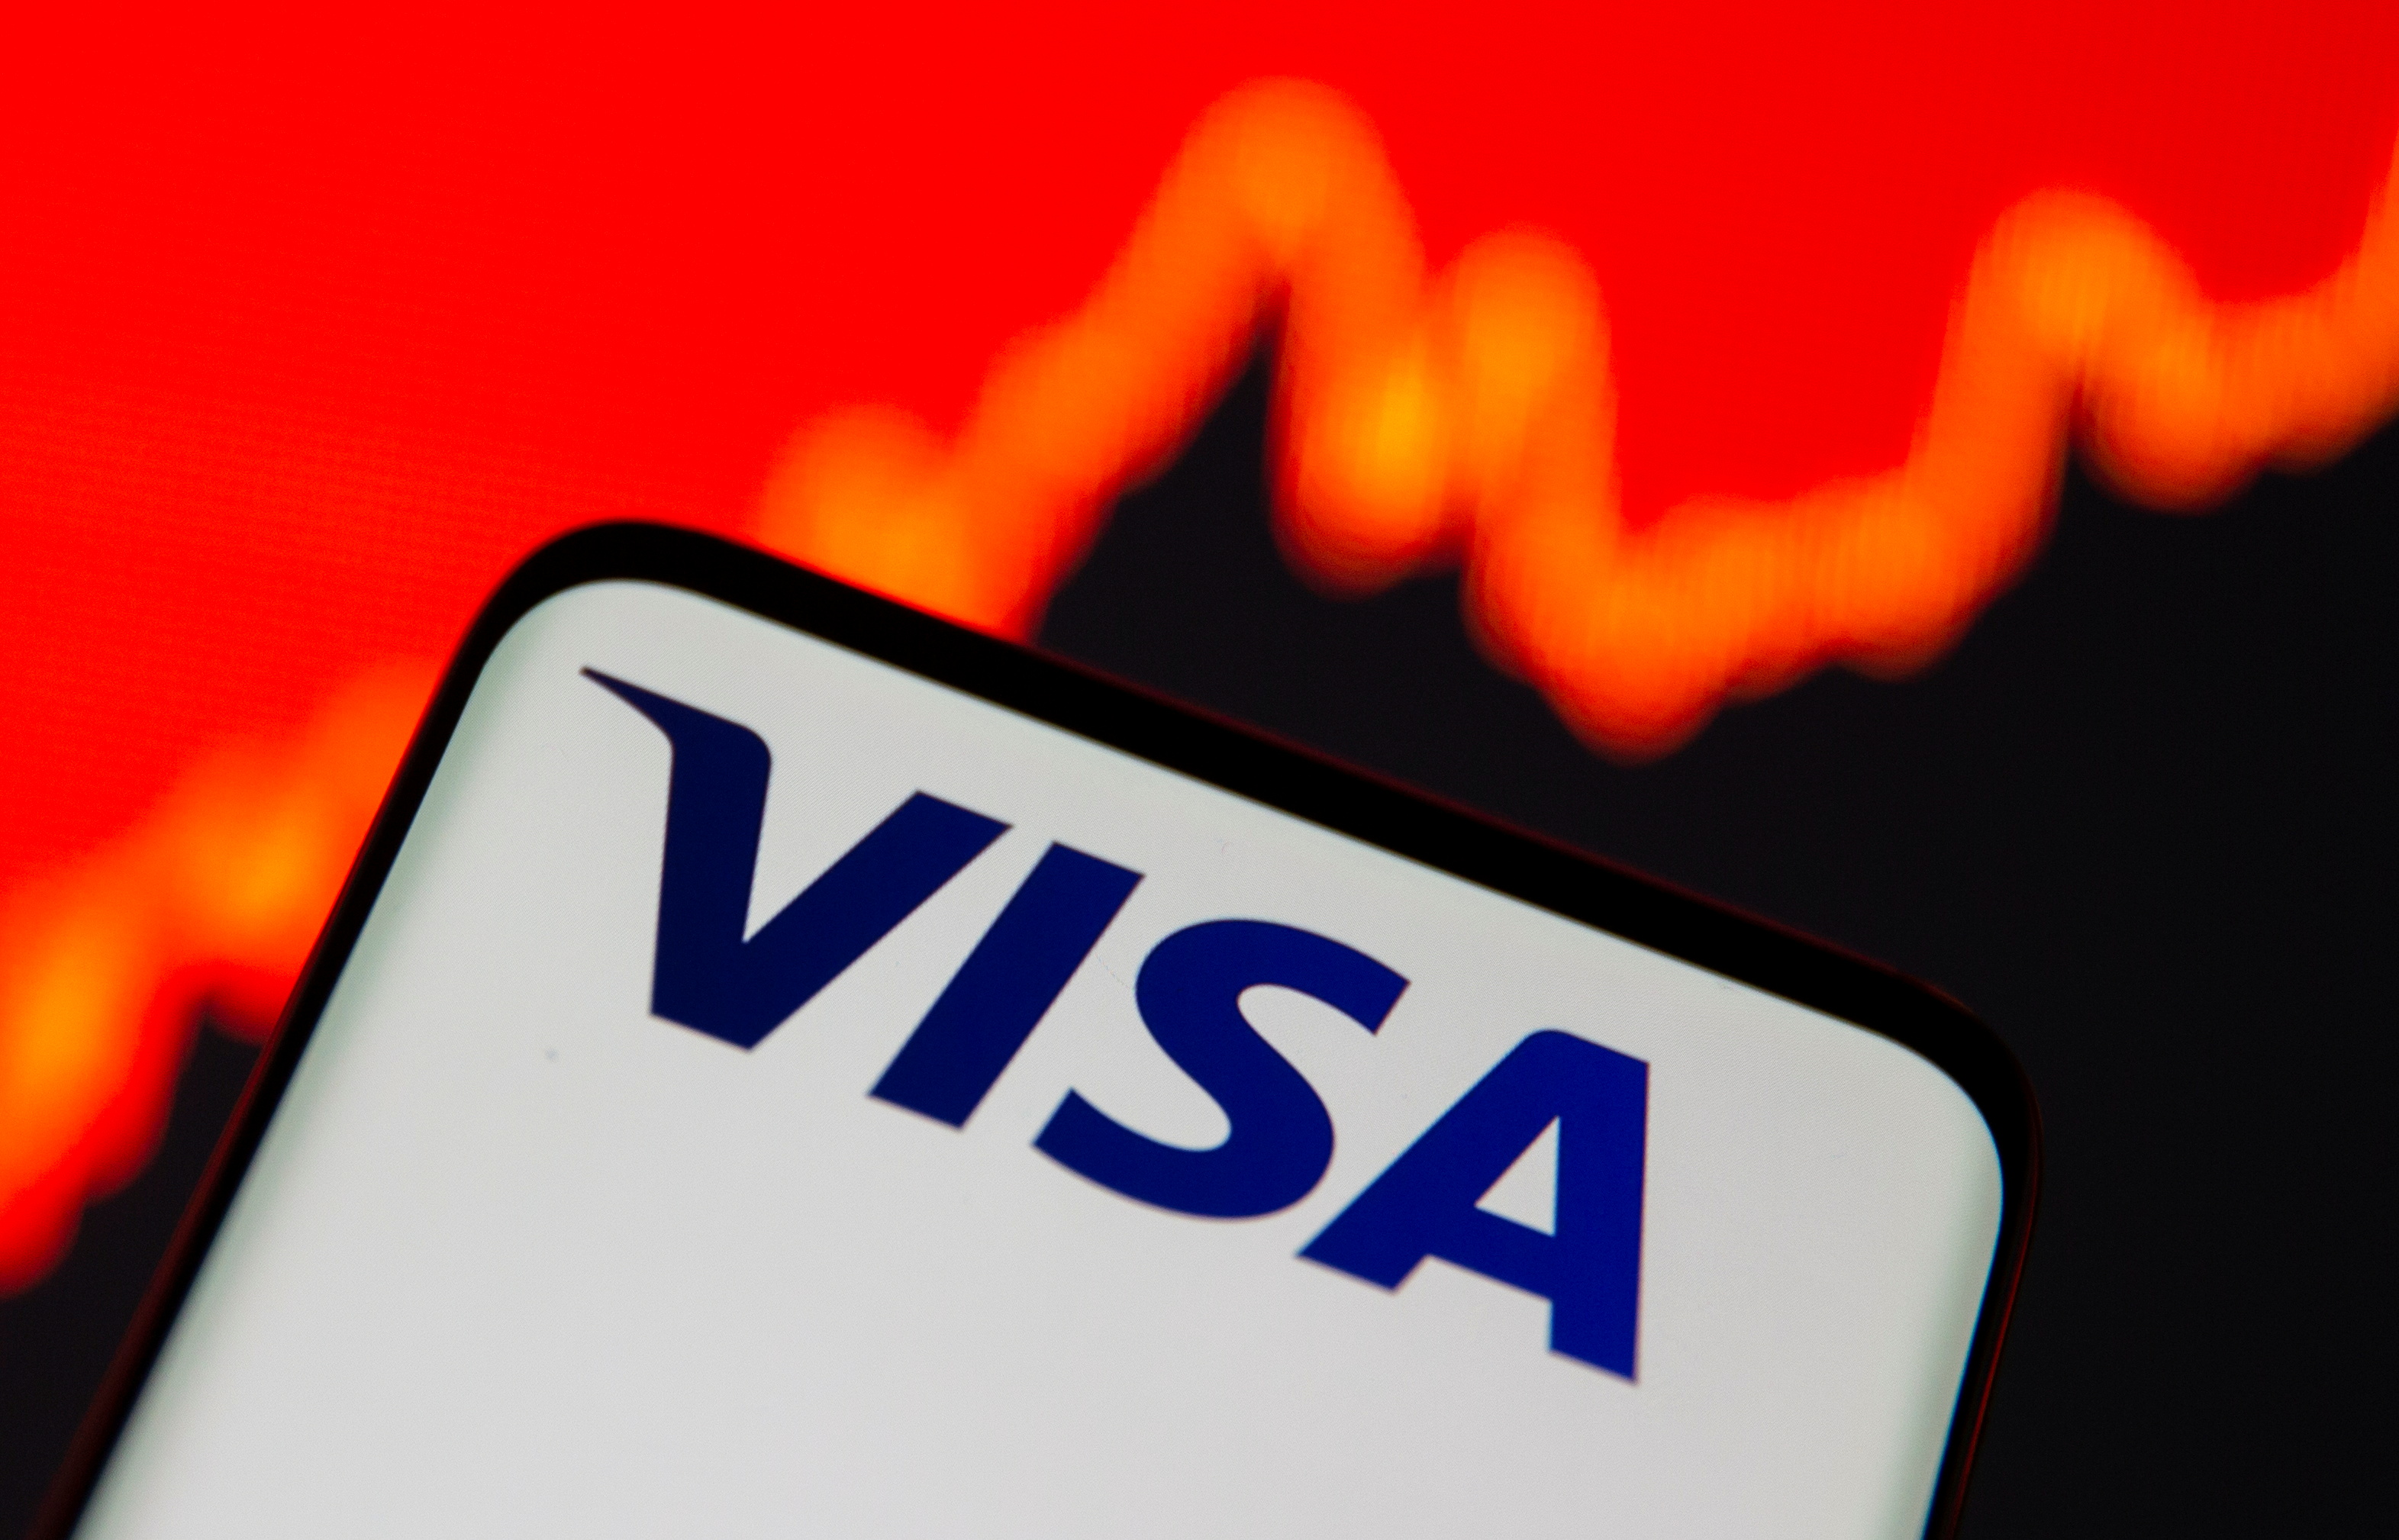 Smartphone with Visa logo is seen in front of displayed stock graph in this illustration